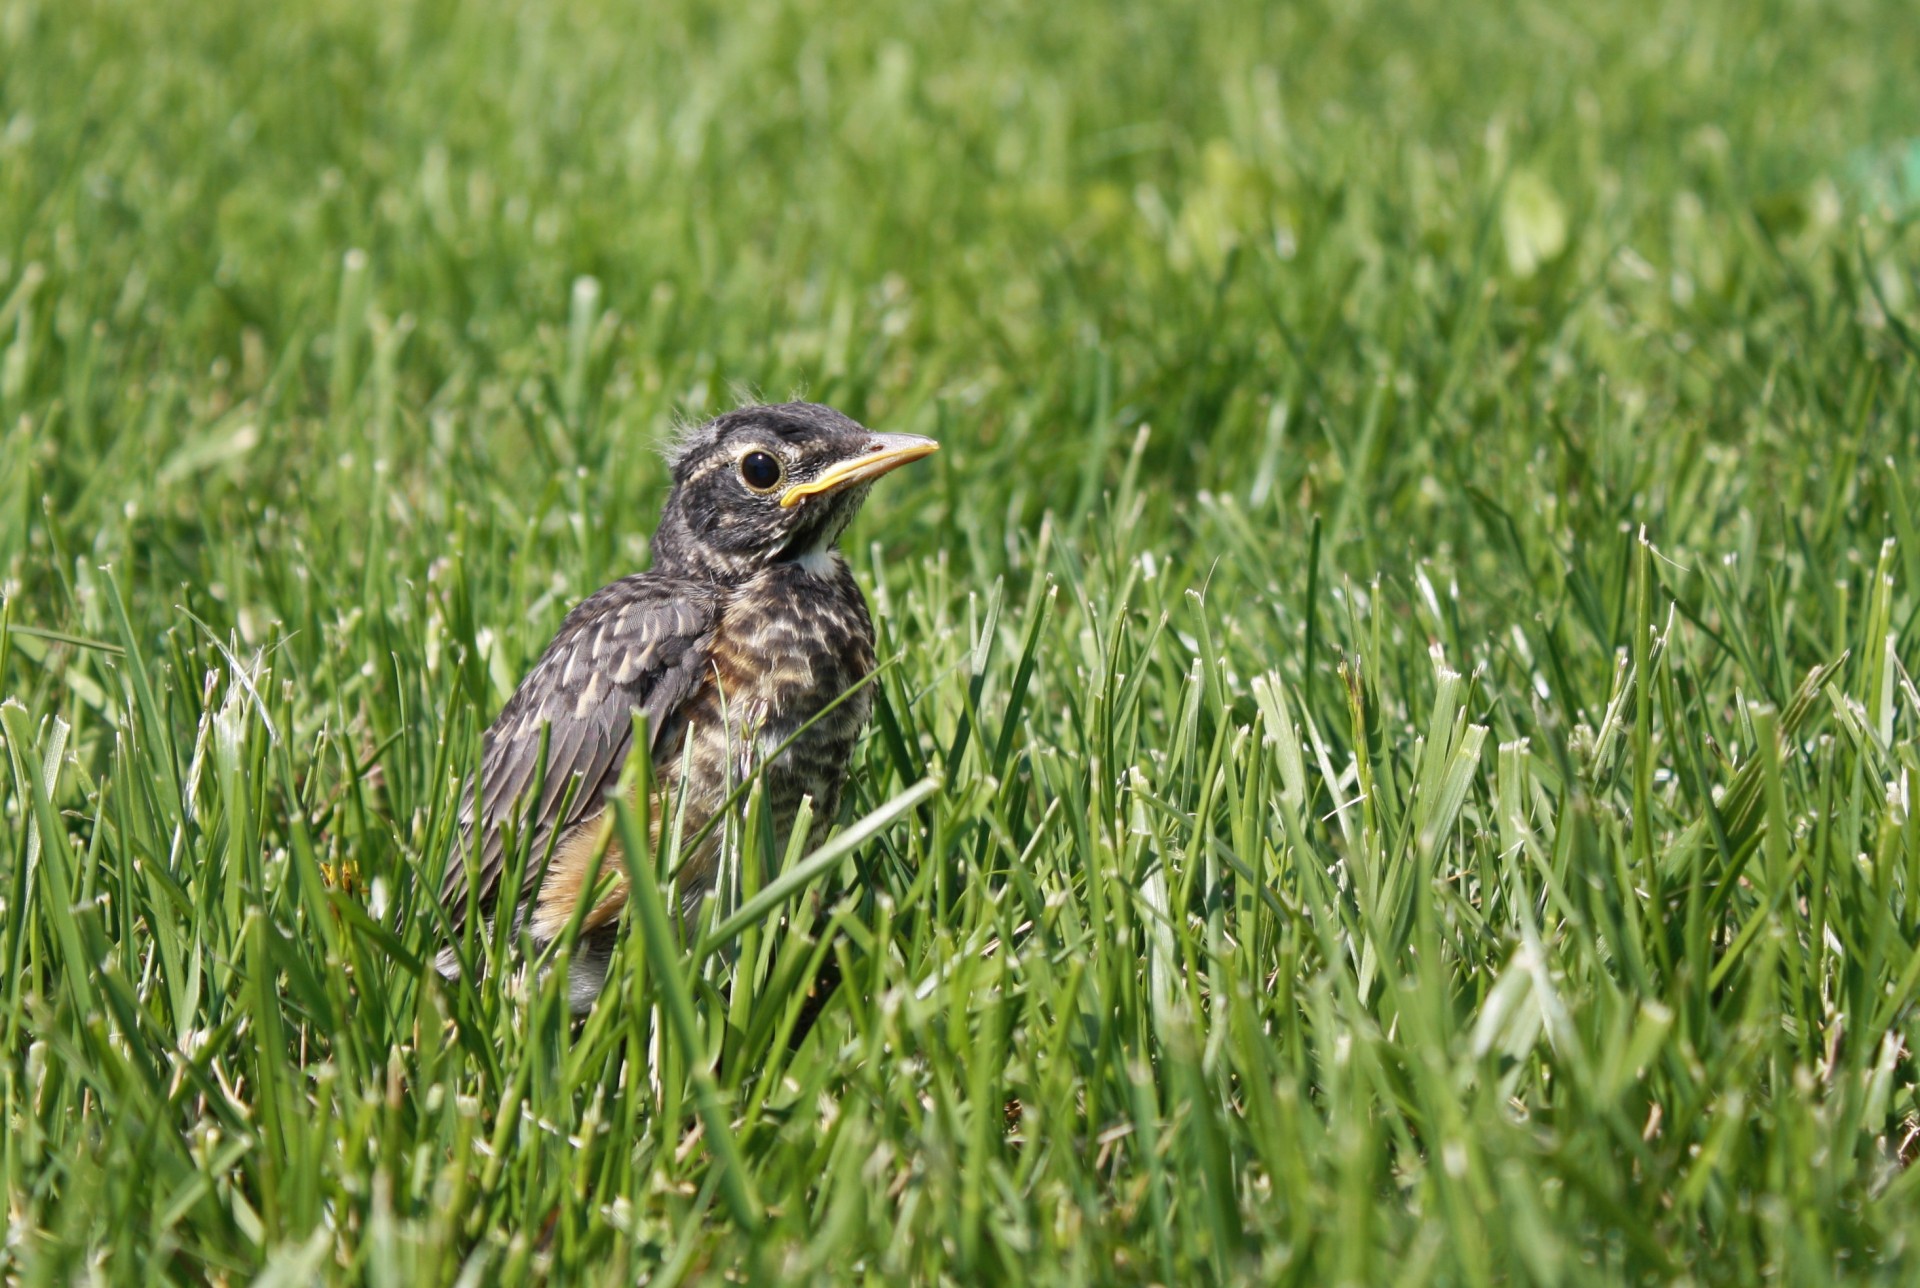 Baby bird fell from his nest, standing in grass